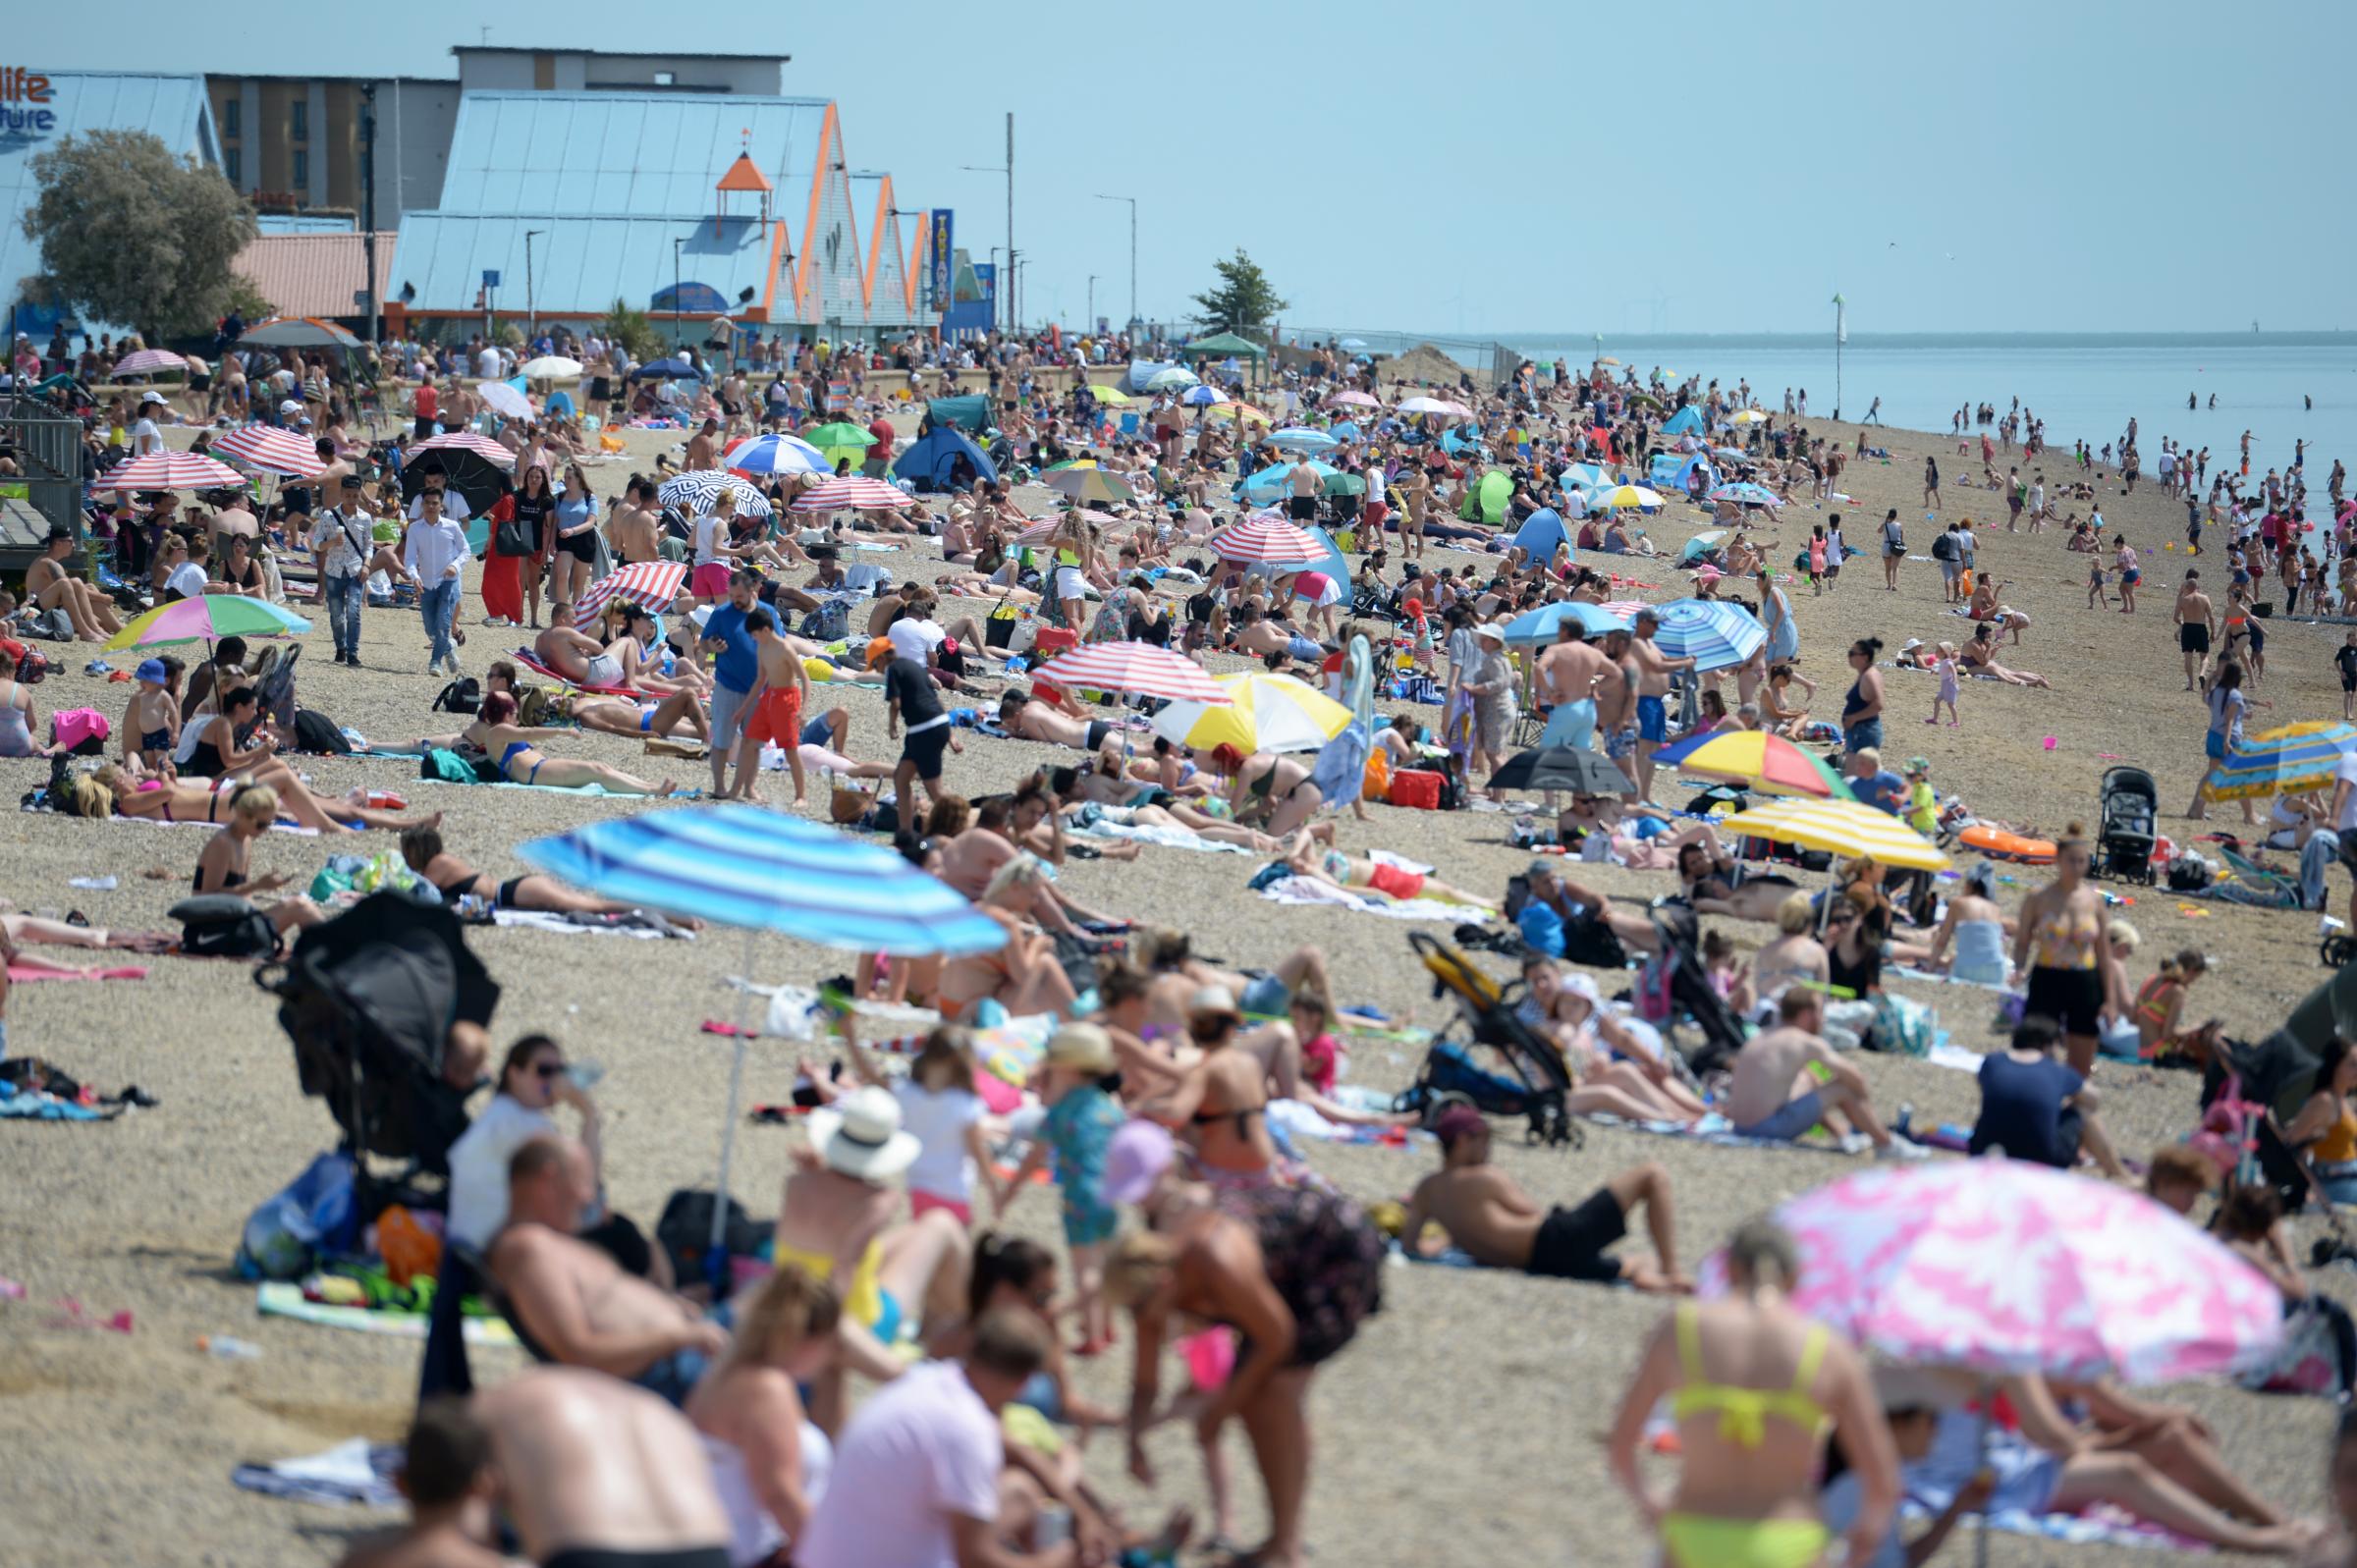 People enjoying the good weather on the beach at Southend